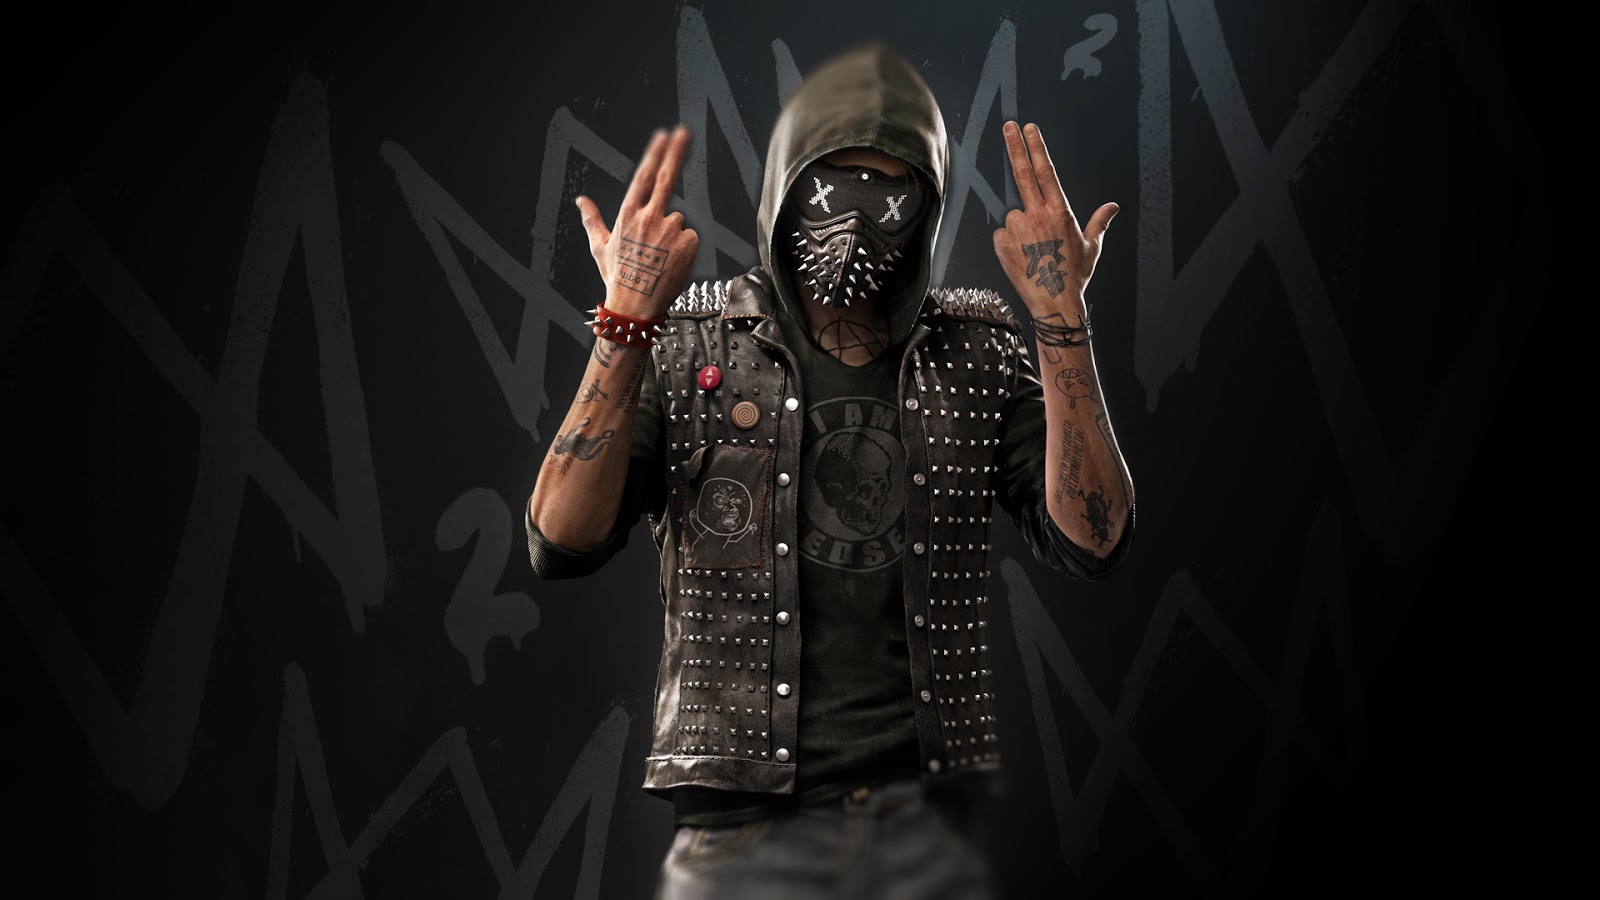 Watch dogs 2 Wallpapers